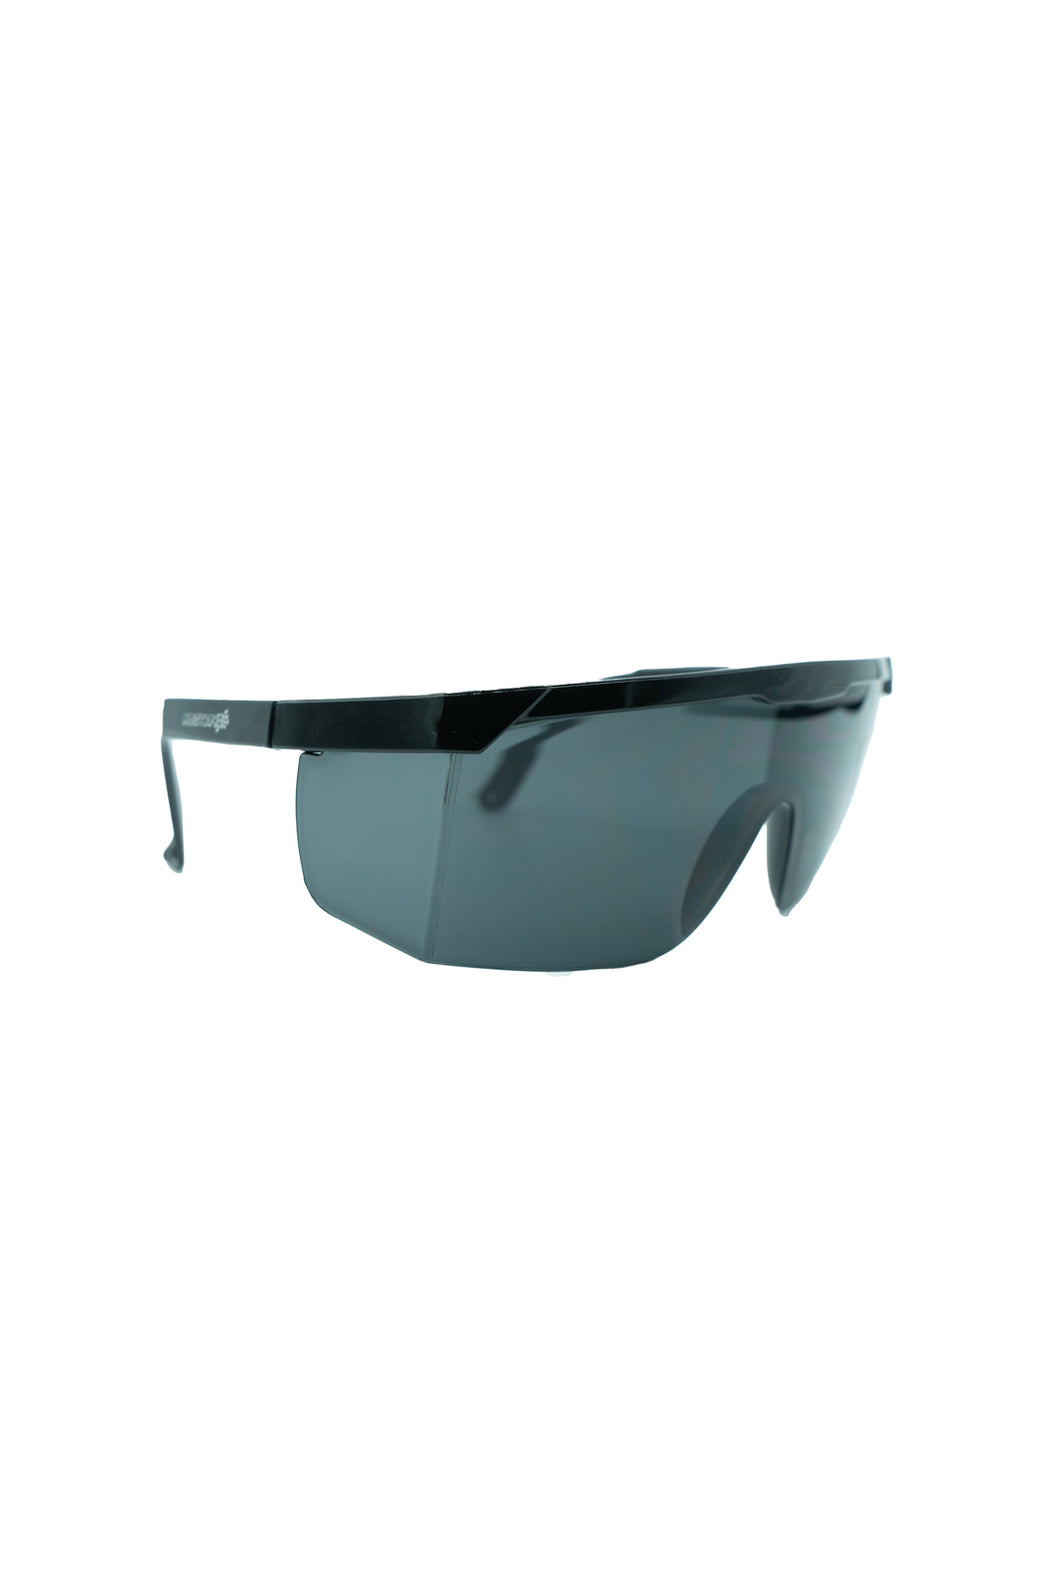 MB Safety Sunnies